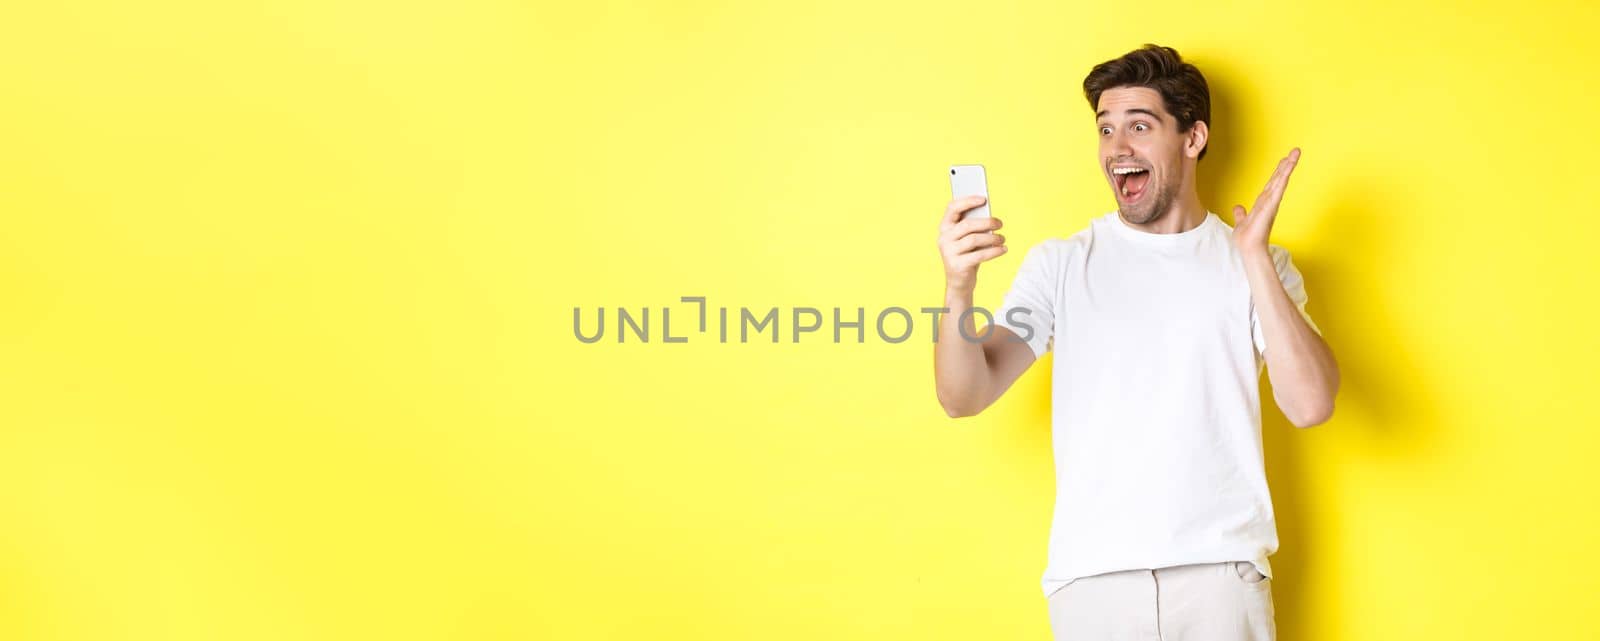 Surprised and happy man looking at mobile phone screen, reading fantastic news, standing over yellow background.